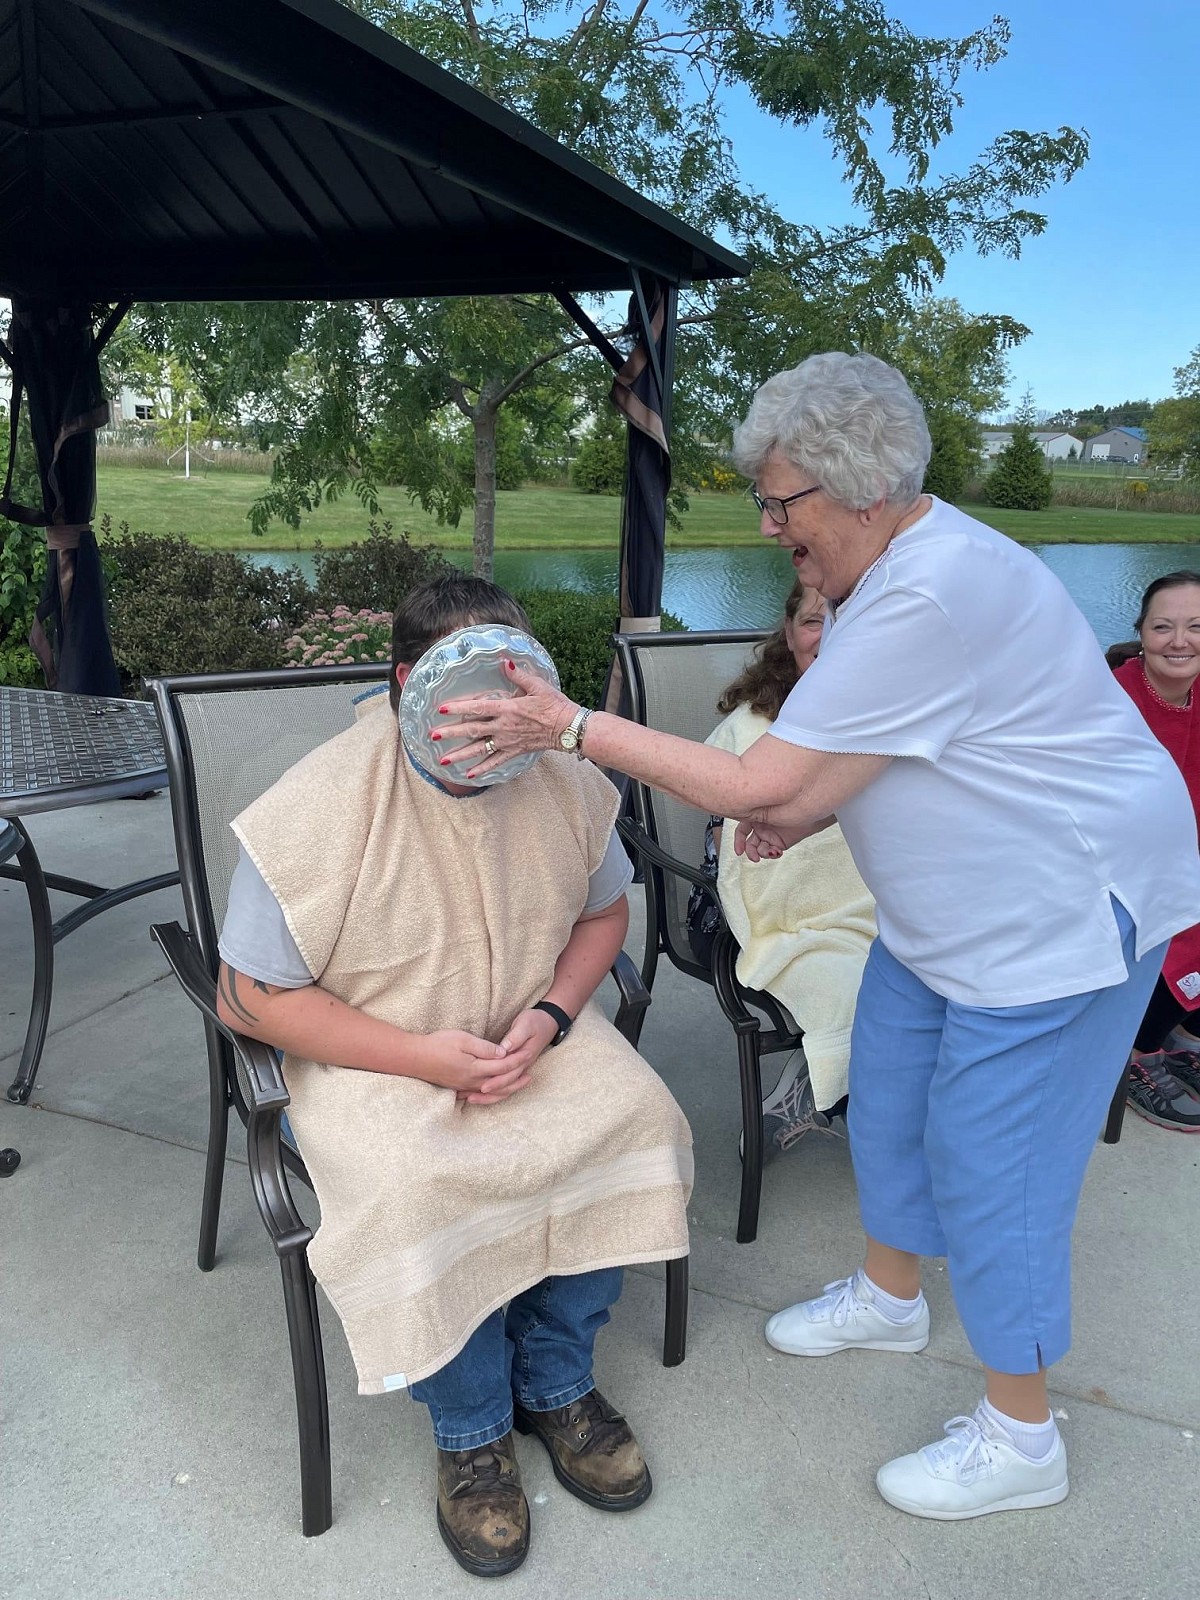 Pine Haven resident putting a pie on someone else's face for a fundraiser